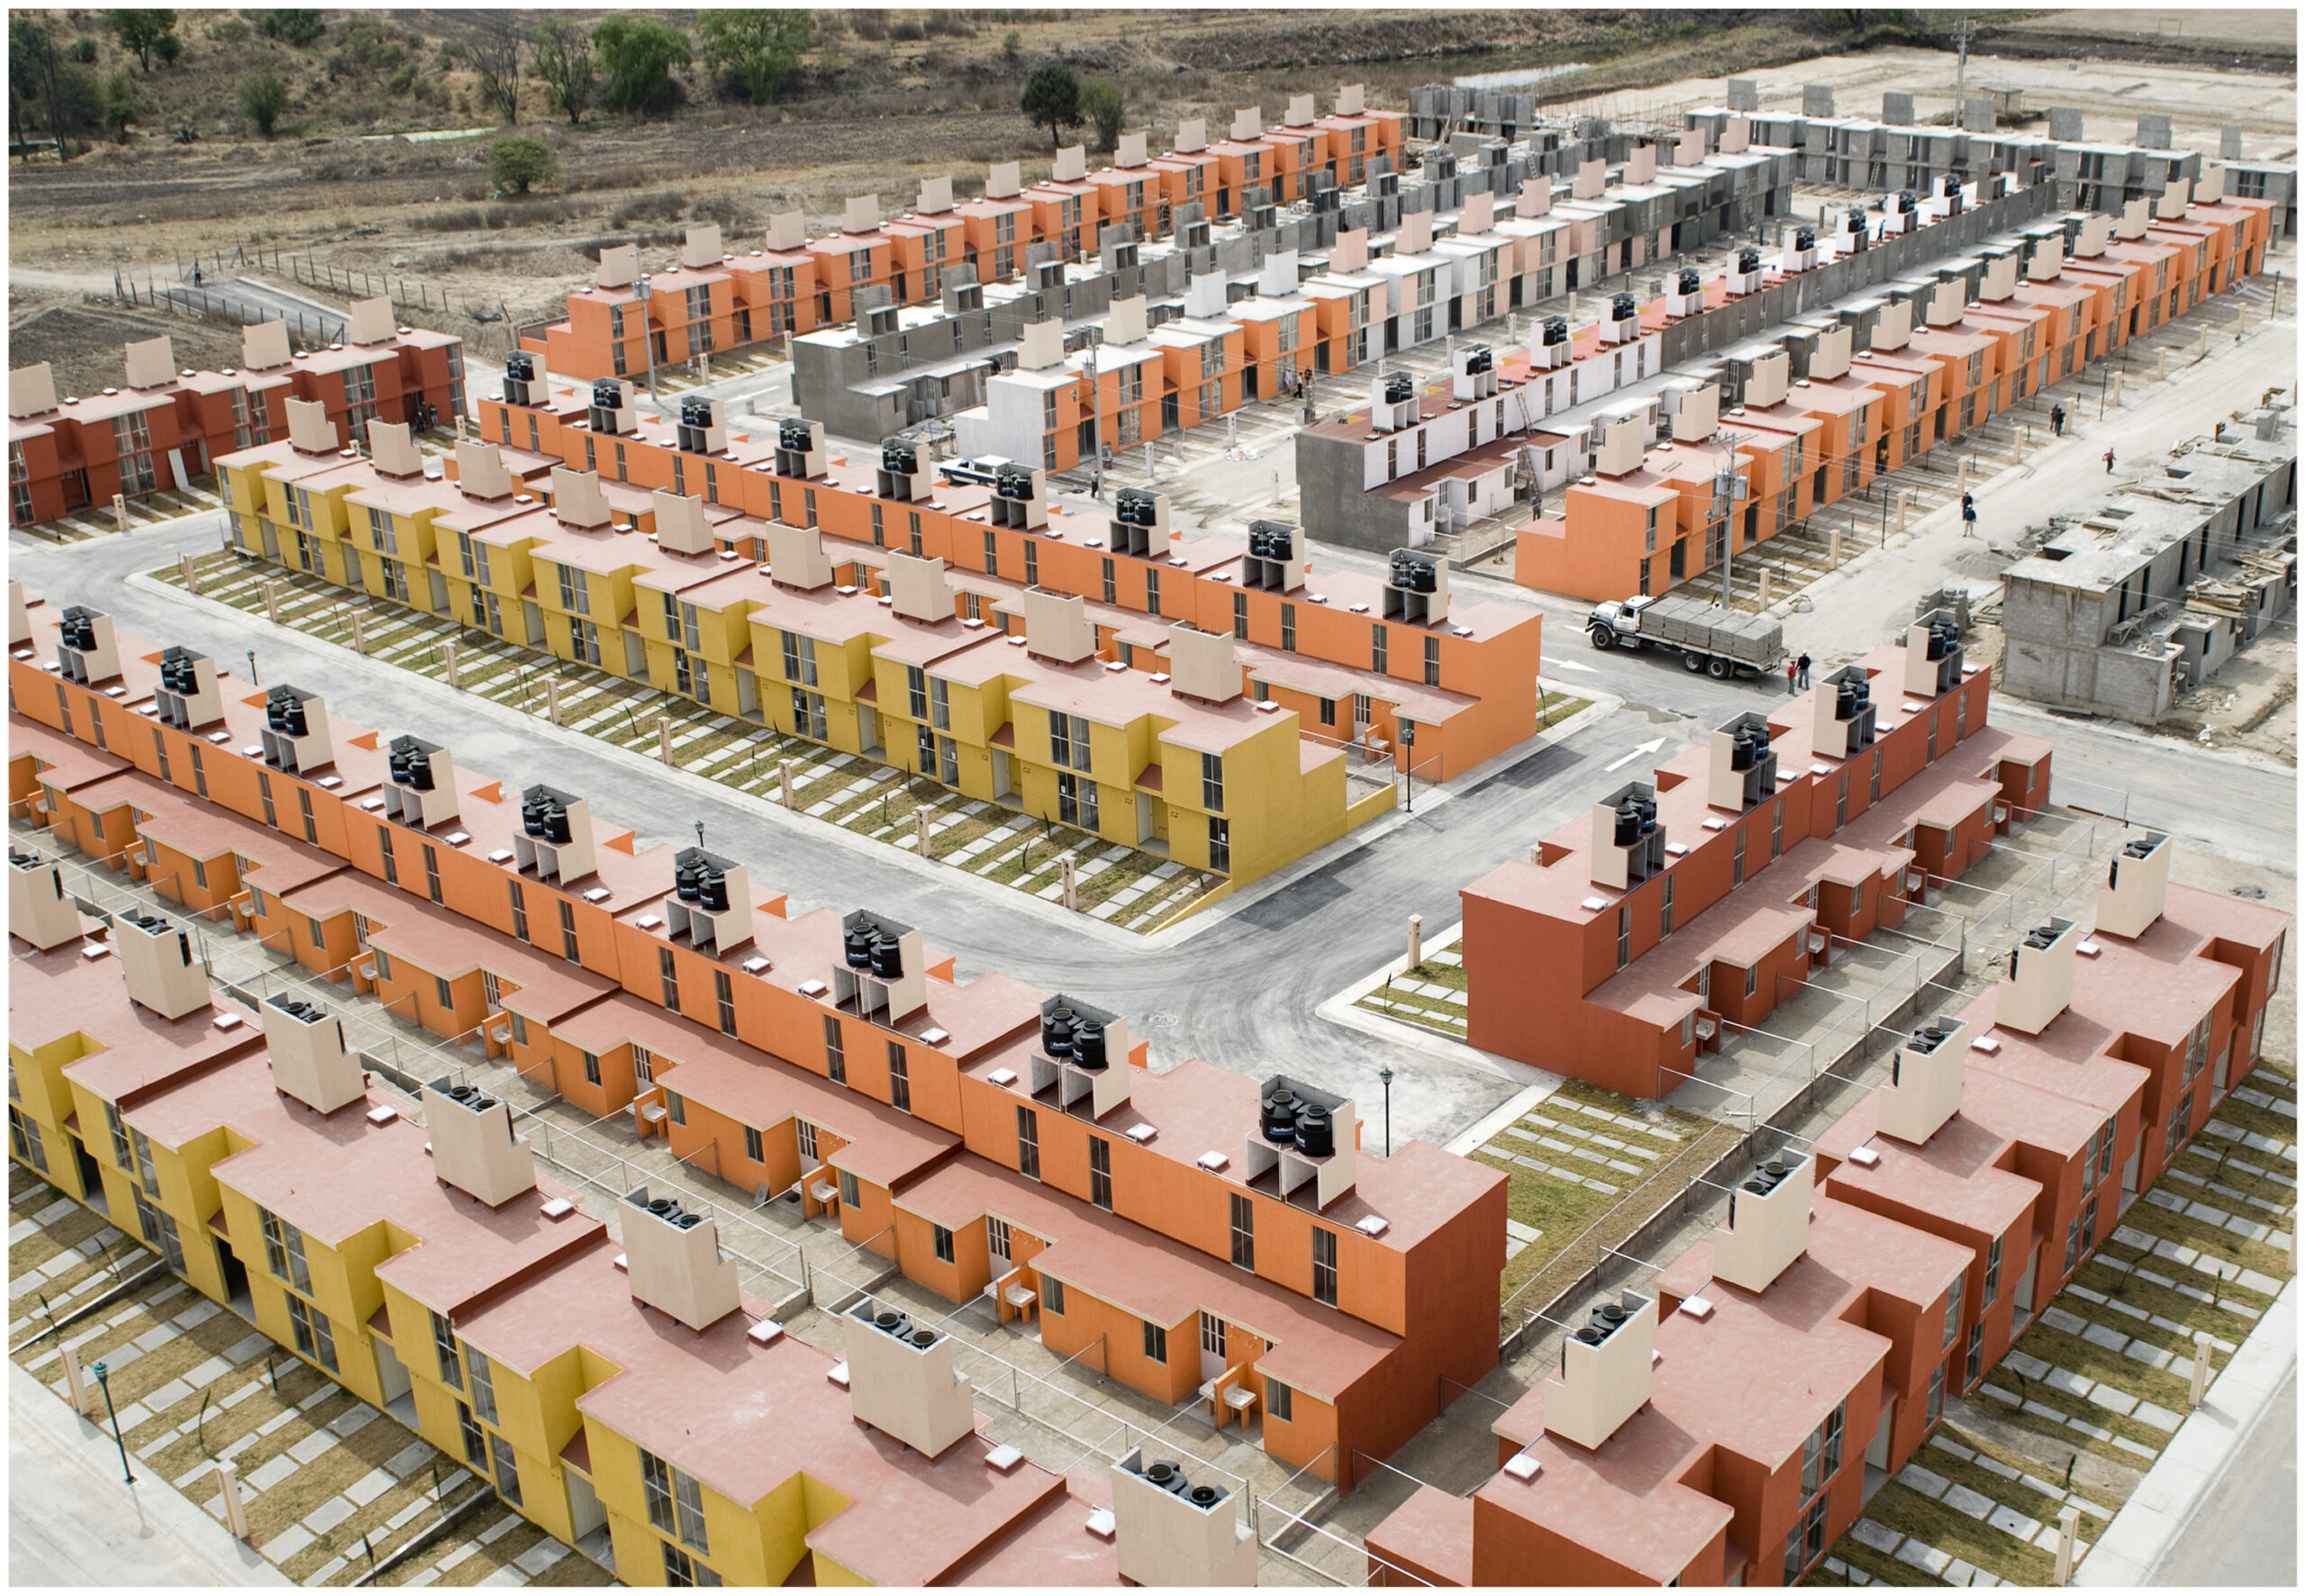 Reshaping Mexico's Approach to Housing and Urban Sprawl